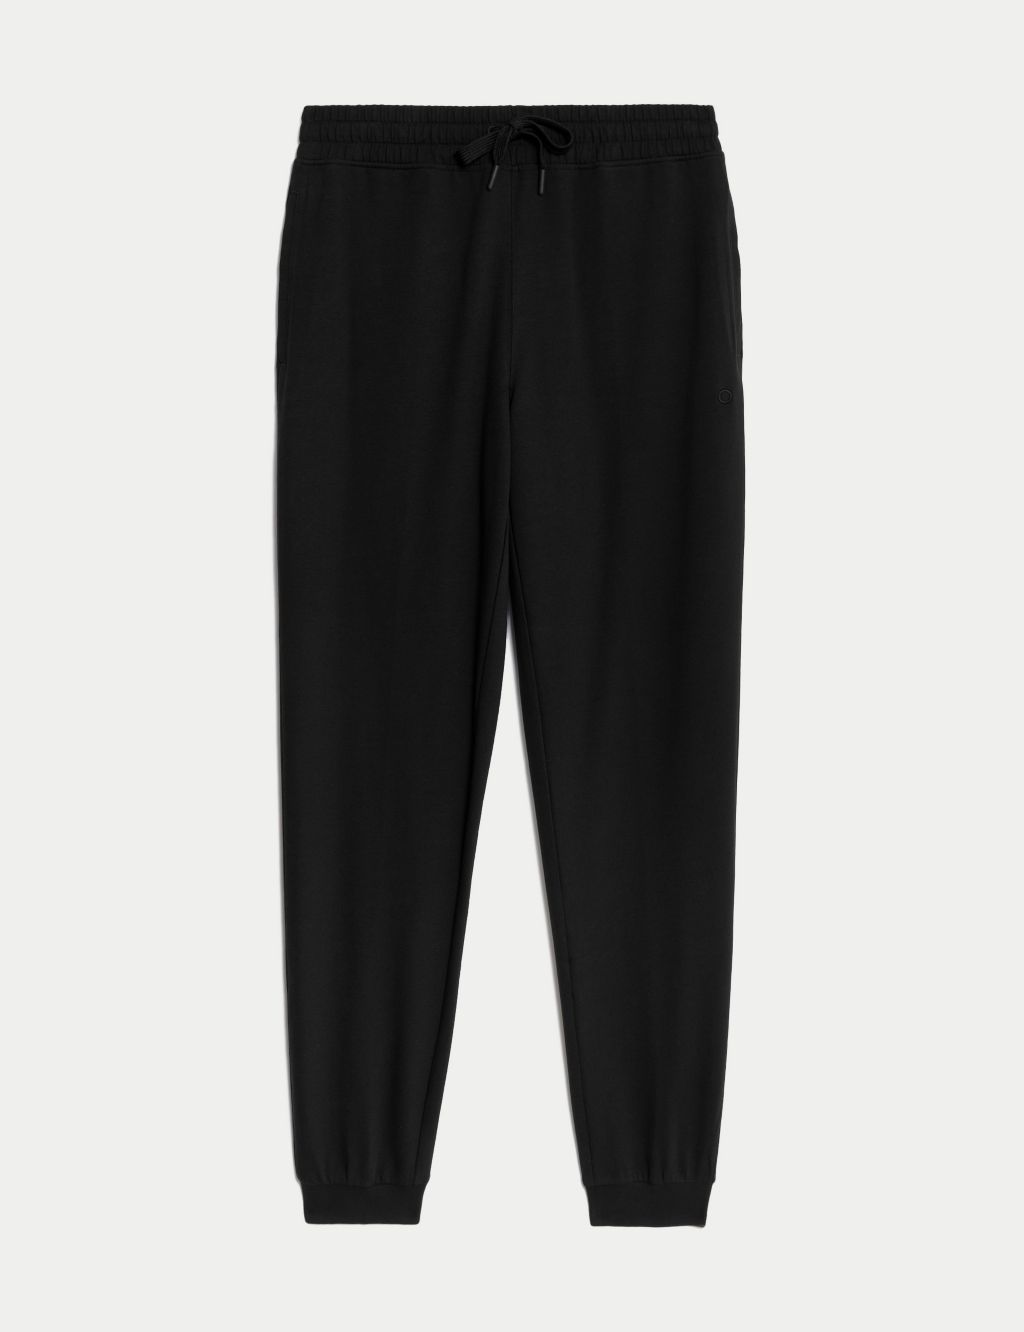 Cotton Rich Cuffed High Waisted Joggers image 2